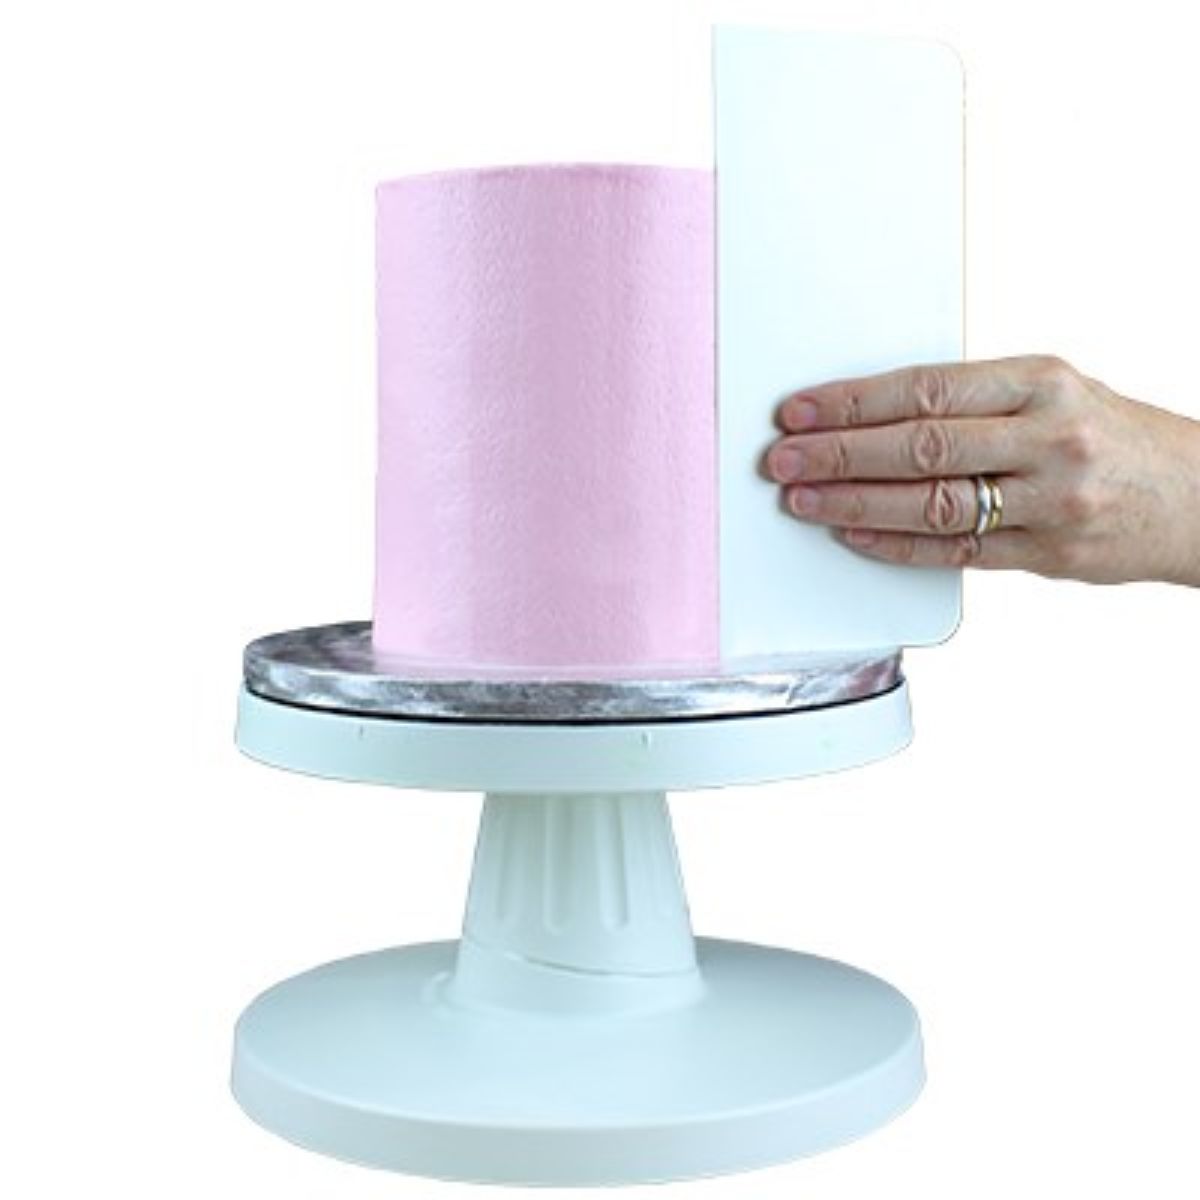 Amazon.com: Lacupella Acrylic Cake Scraper 12 inch Tall with Flora Comfy  Grips Combo - 1 piece Scraper and 2 pieces of Silicone Grips - For  Buttercream Icing Ganache Smoother: Home & Kitchen